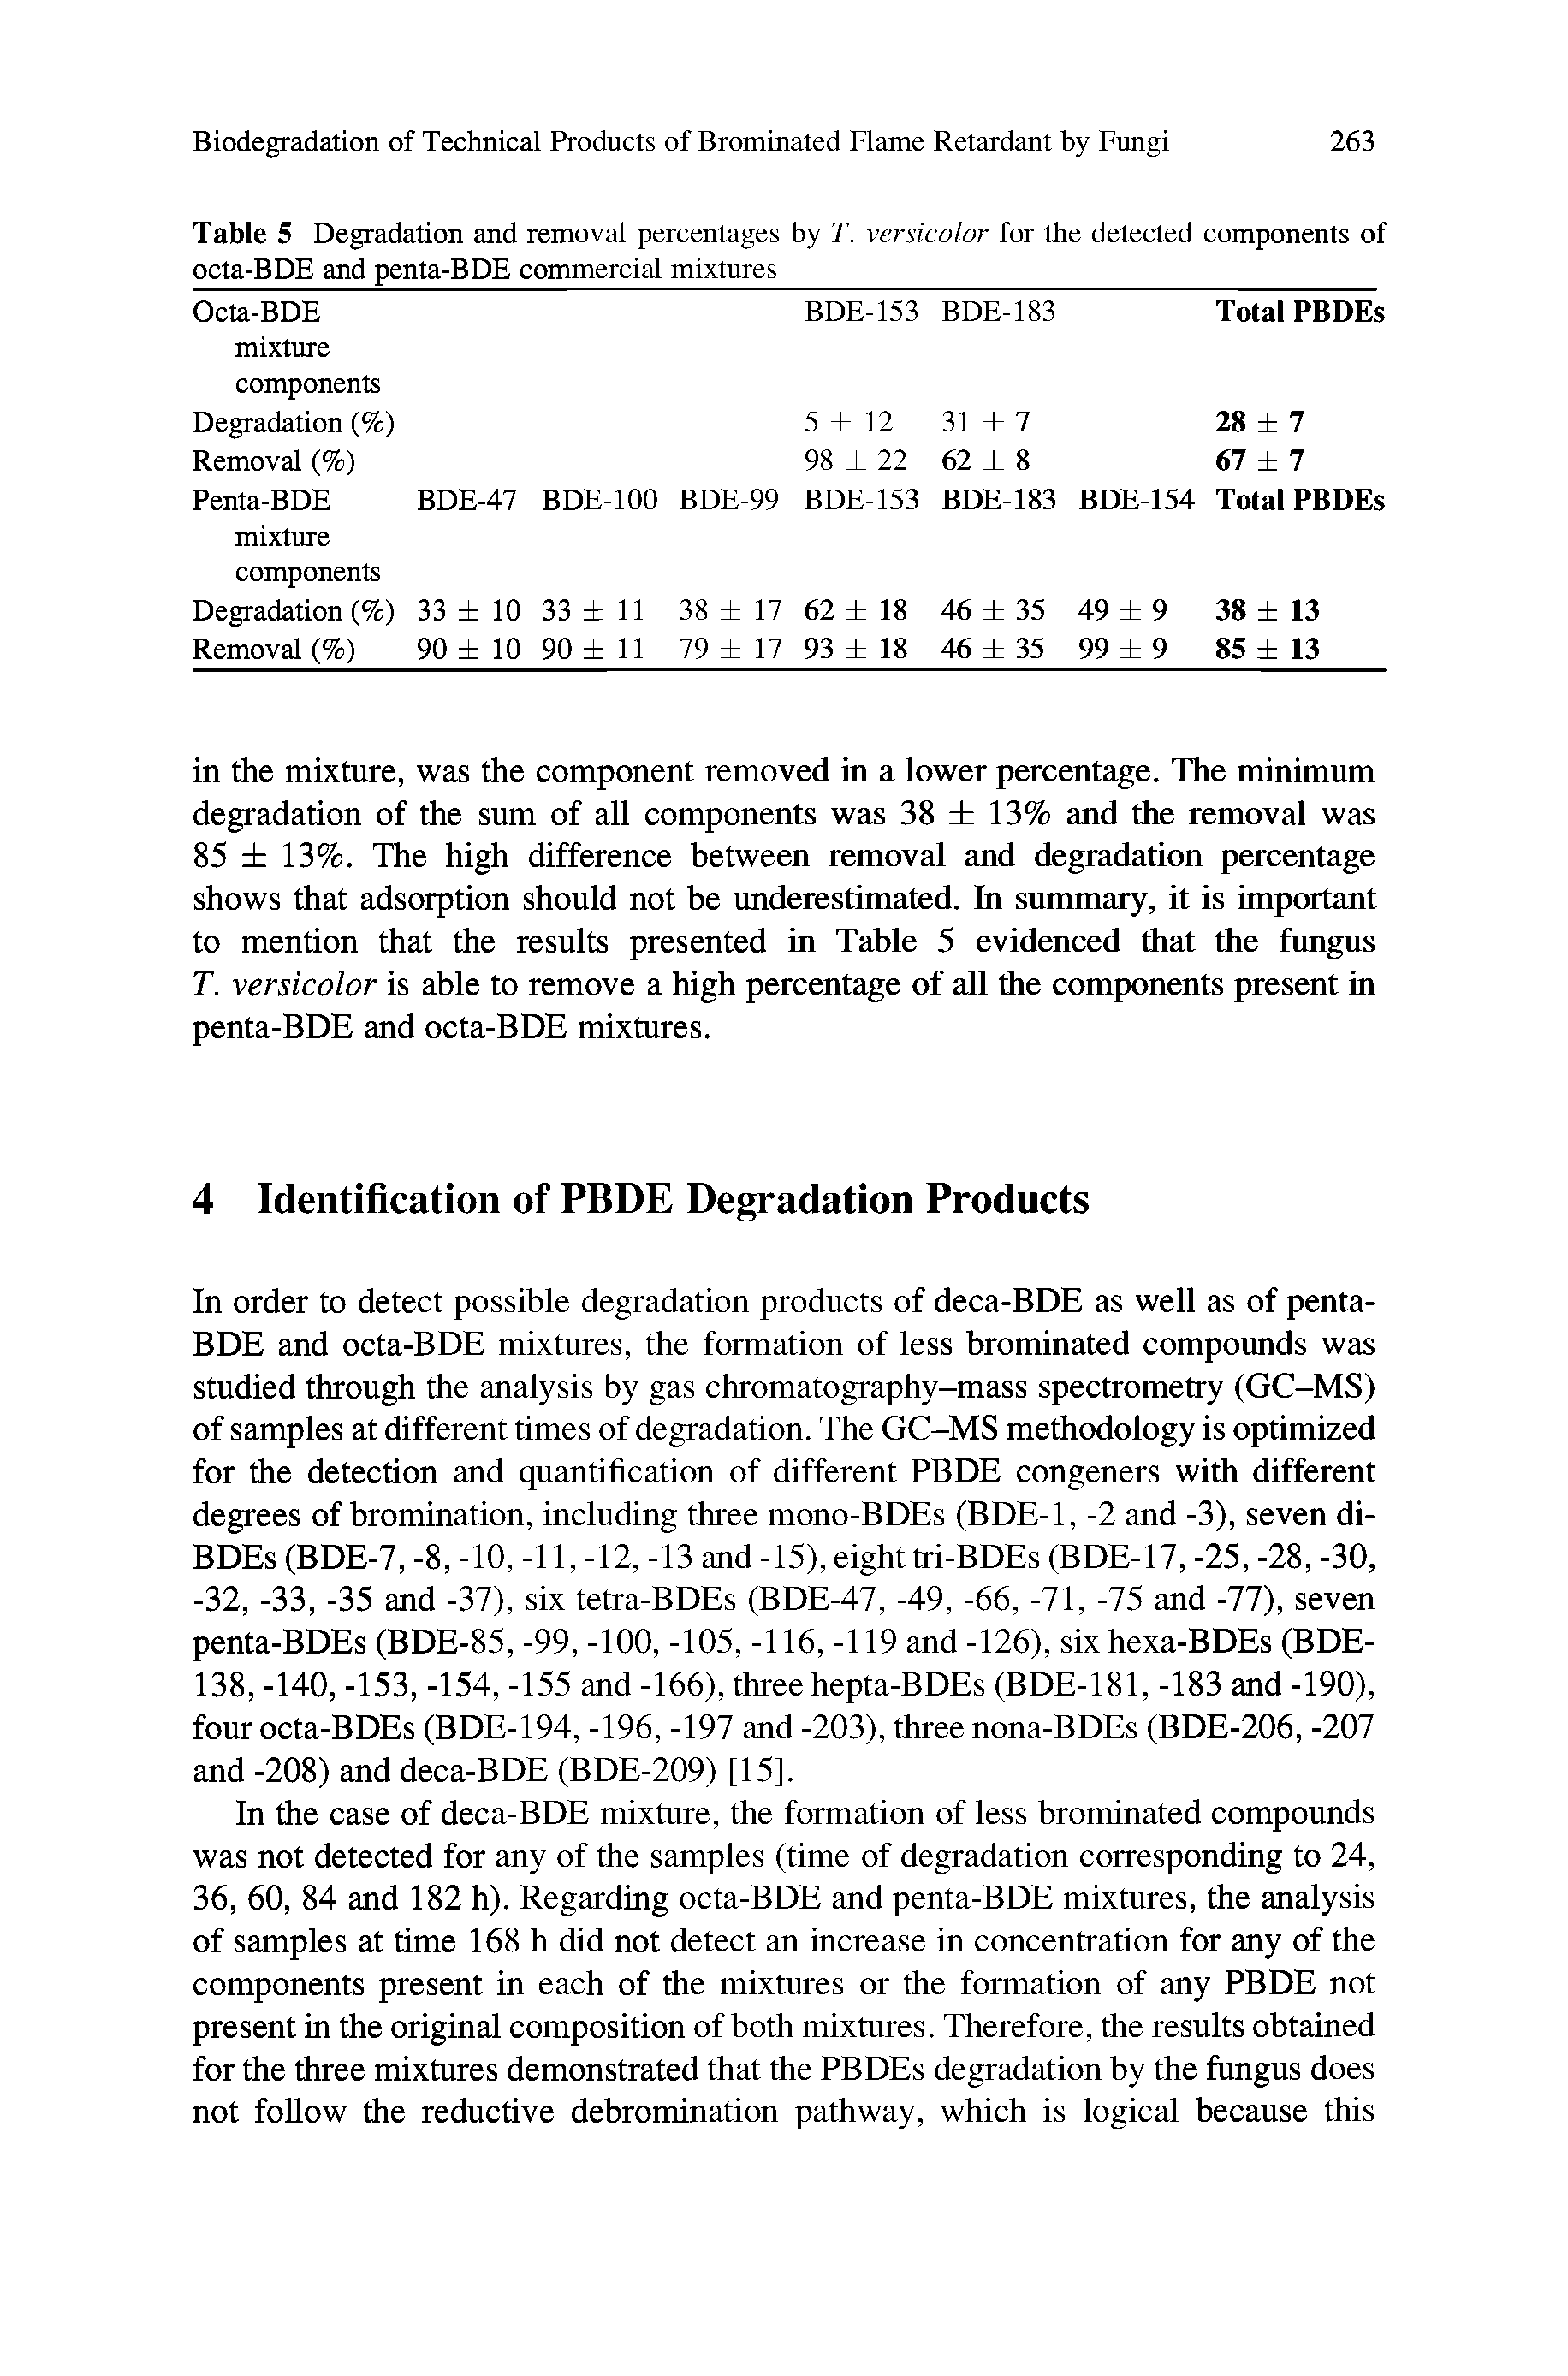 Table 5 Degradation and removal percentages by T. versicolor for the detected components of octa-BDE and penta-BDE commercial mixtures...